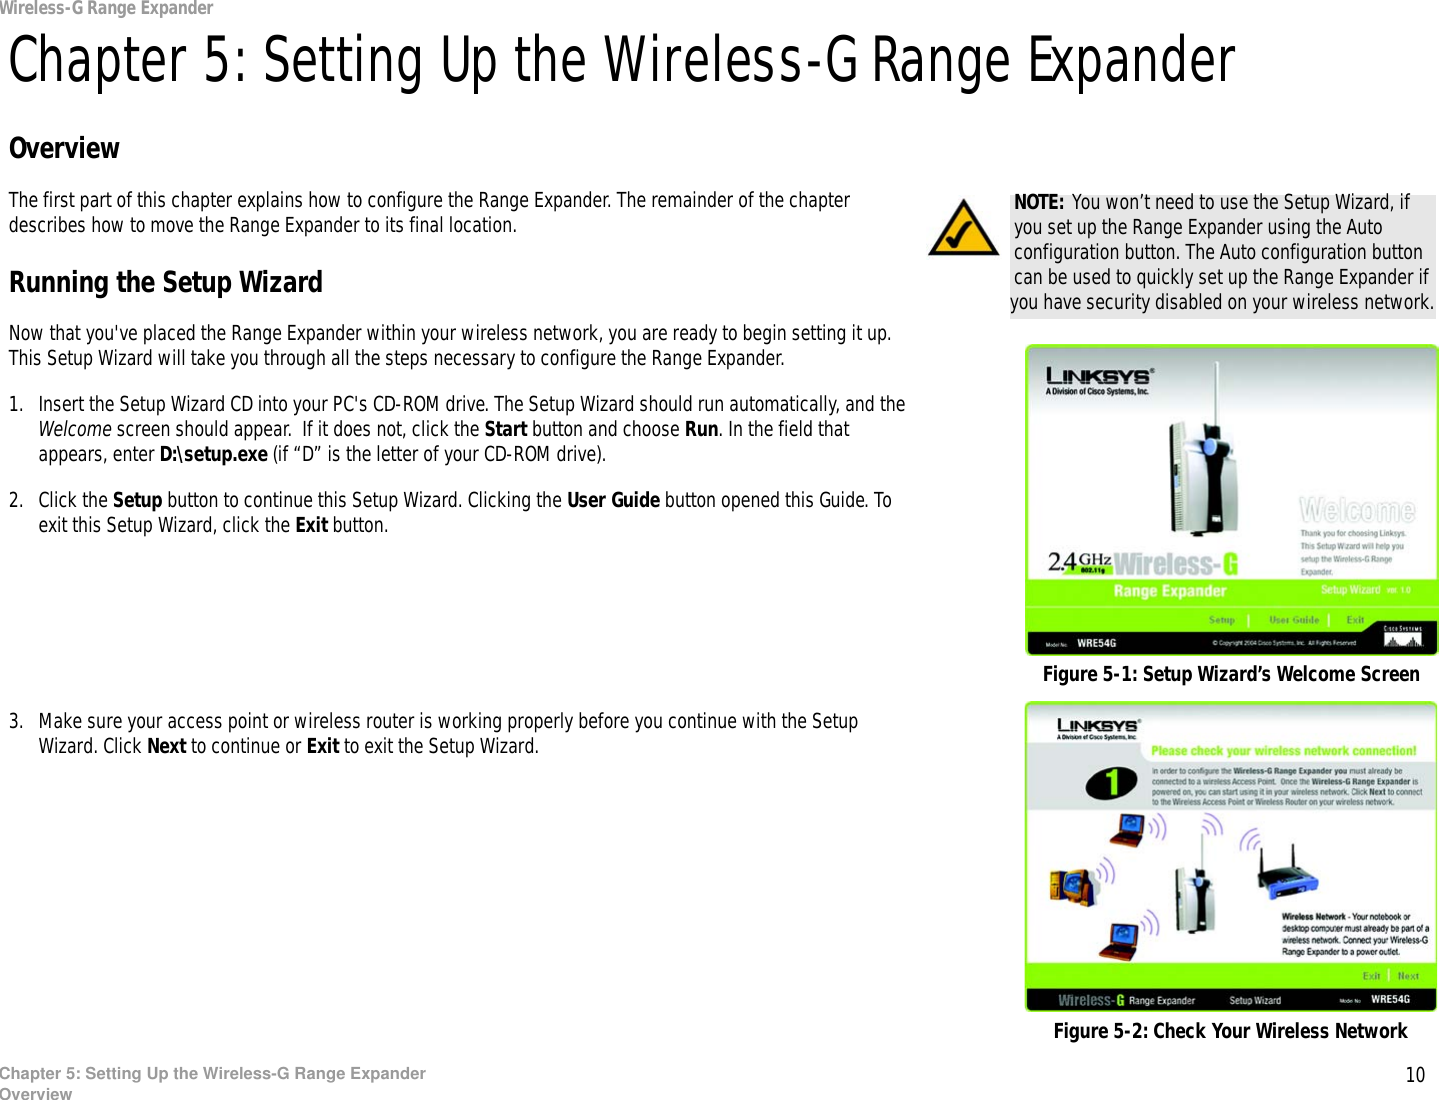 10Chapter 5: Setting Up the Wireless-G Range ExpanderOverviewWireless-G Range ExpanderChapter 5: Setting Up the Wireless-G Range ExpanderOverviewThe first part of this chapter explains how to configure the Range Expander. The remainder of the chapter describes how to move the Range Expander to its final location.Running the Setup WizardNow that you&apos;ve placed the Range Expander within your wireless network, you are ready to begin setting it up. This Setup Wizard will take you through all the steps necessary to configure the Range Expander.1. Insert the Setup Wizard CD into your PC&apos;s CD-ROM drive. The Setup Wizard should run automatically, and the Welcome screen should appear.  If it does not, click the Start button and choose Run. In the field that appears, enter D:\setup.exe (if “D” is the letter of your CD-ROM drive).2. Click the Setup button to continue this Setup Wizard. Clicking the User Guide button opened this Guide. To exit this Setup Wizard, click the Exit button.3. Make sure your access point or wireless router is working properly before you continue with the Setup Wizard. Click Next to continue or Exit to exit the Setup Wizard.Figure 5-1: Setup Wizard’s Welcome ScreenNOTE: You won’t need to use the Setup Wizard, if you set up the Range Expander using the Auto configuration button. The Auto configuration button can be used to quickly set up the Range Expander if you have security disabled on your wireless network.Figure 5-2: Check Your Wireless Network